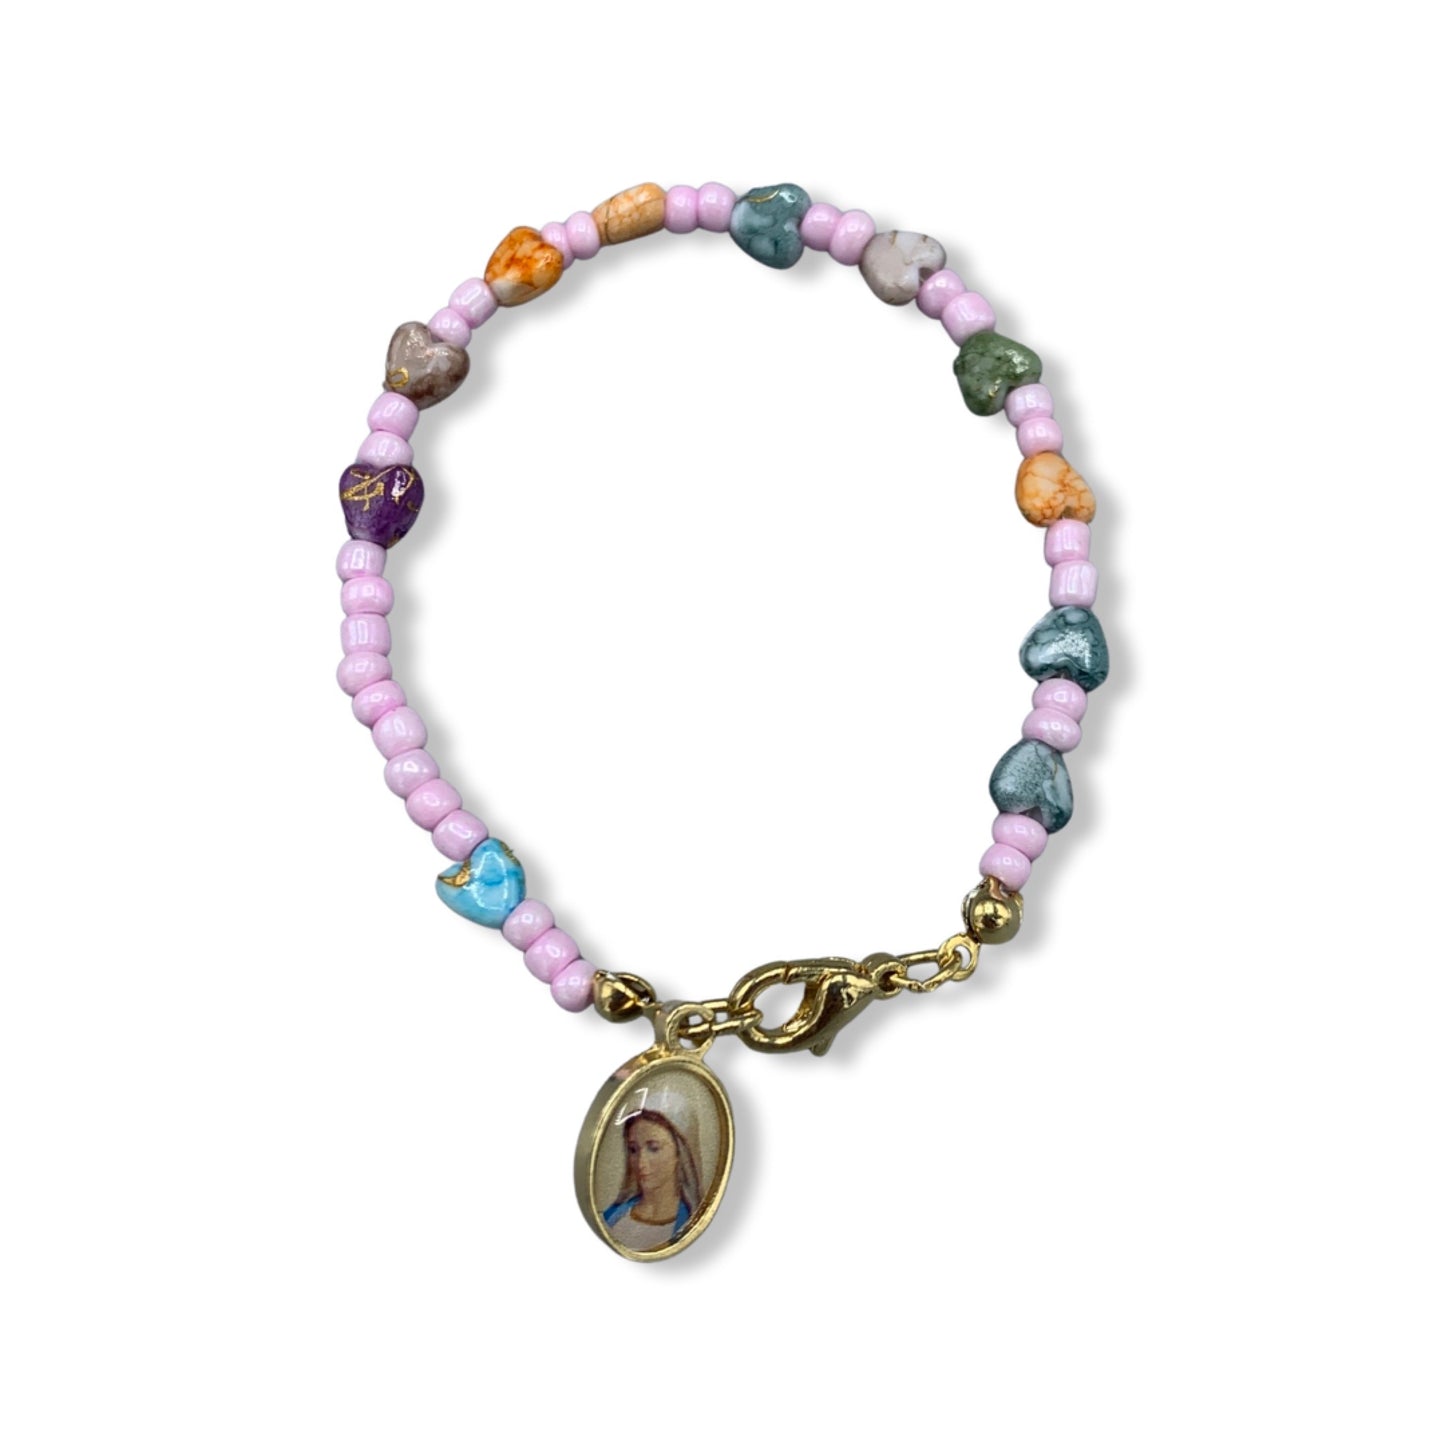 Children's Heart Bead Decade Rosary Bracelet of Assorted Colors